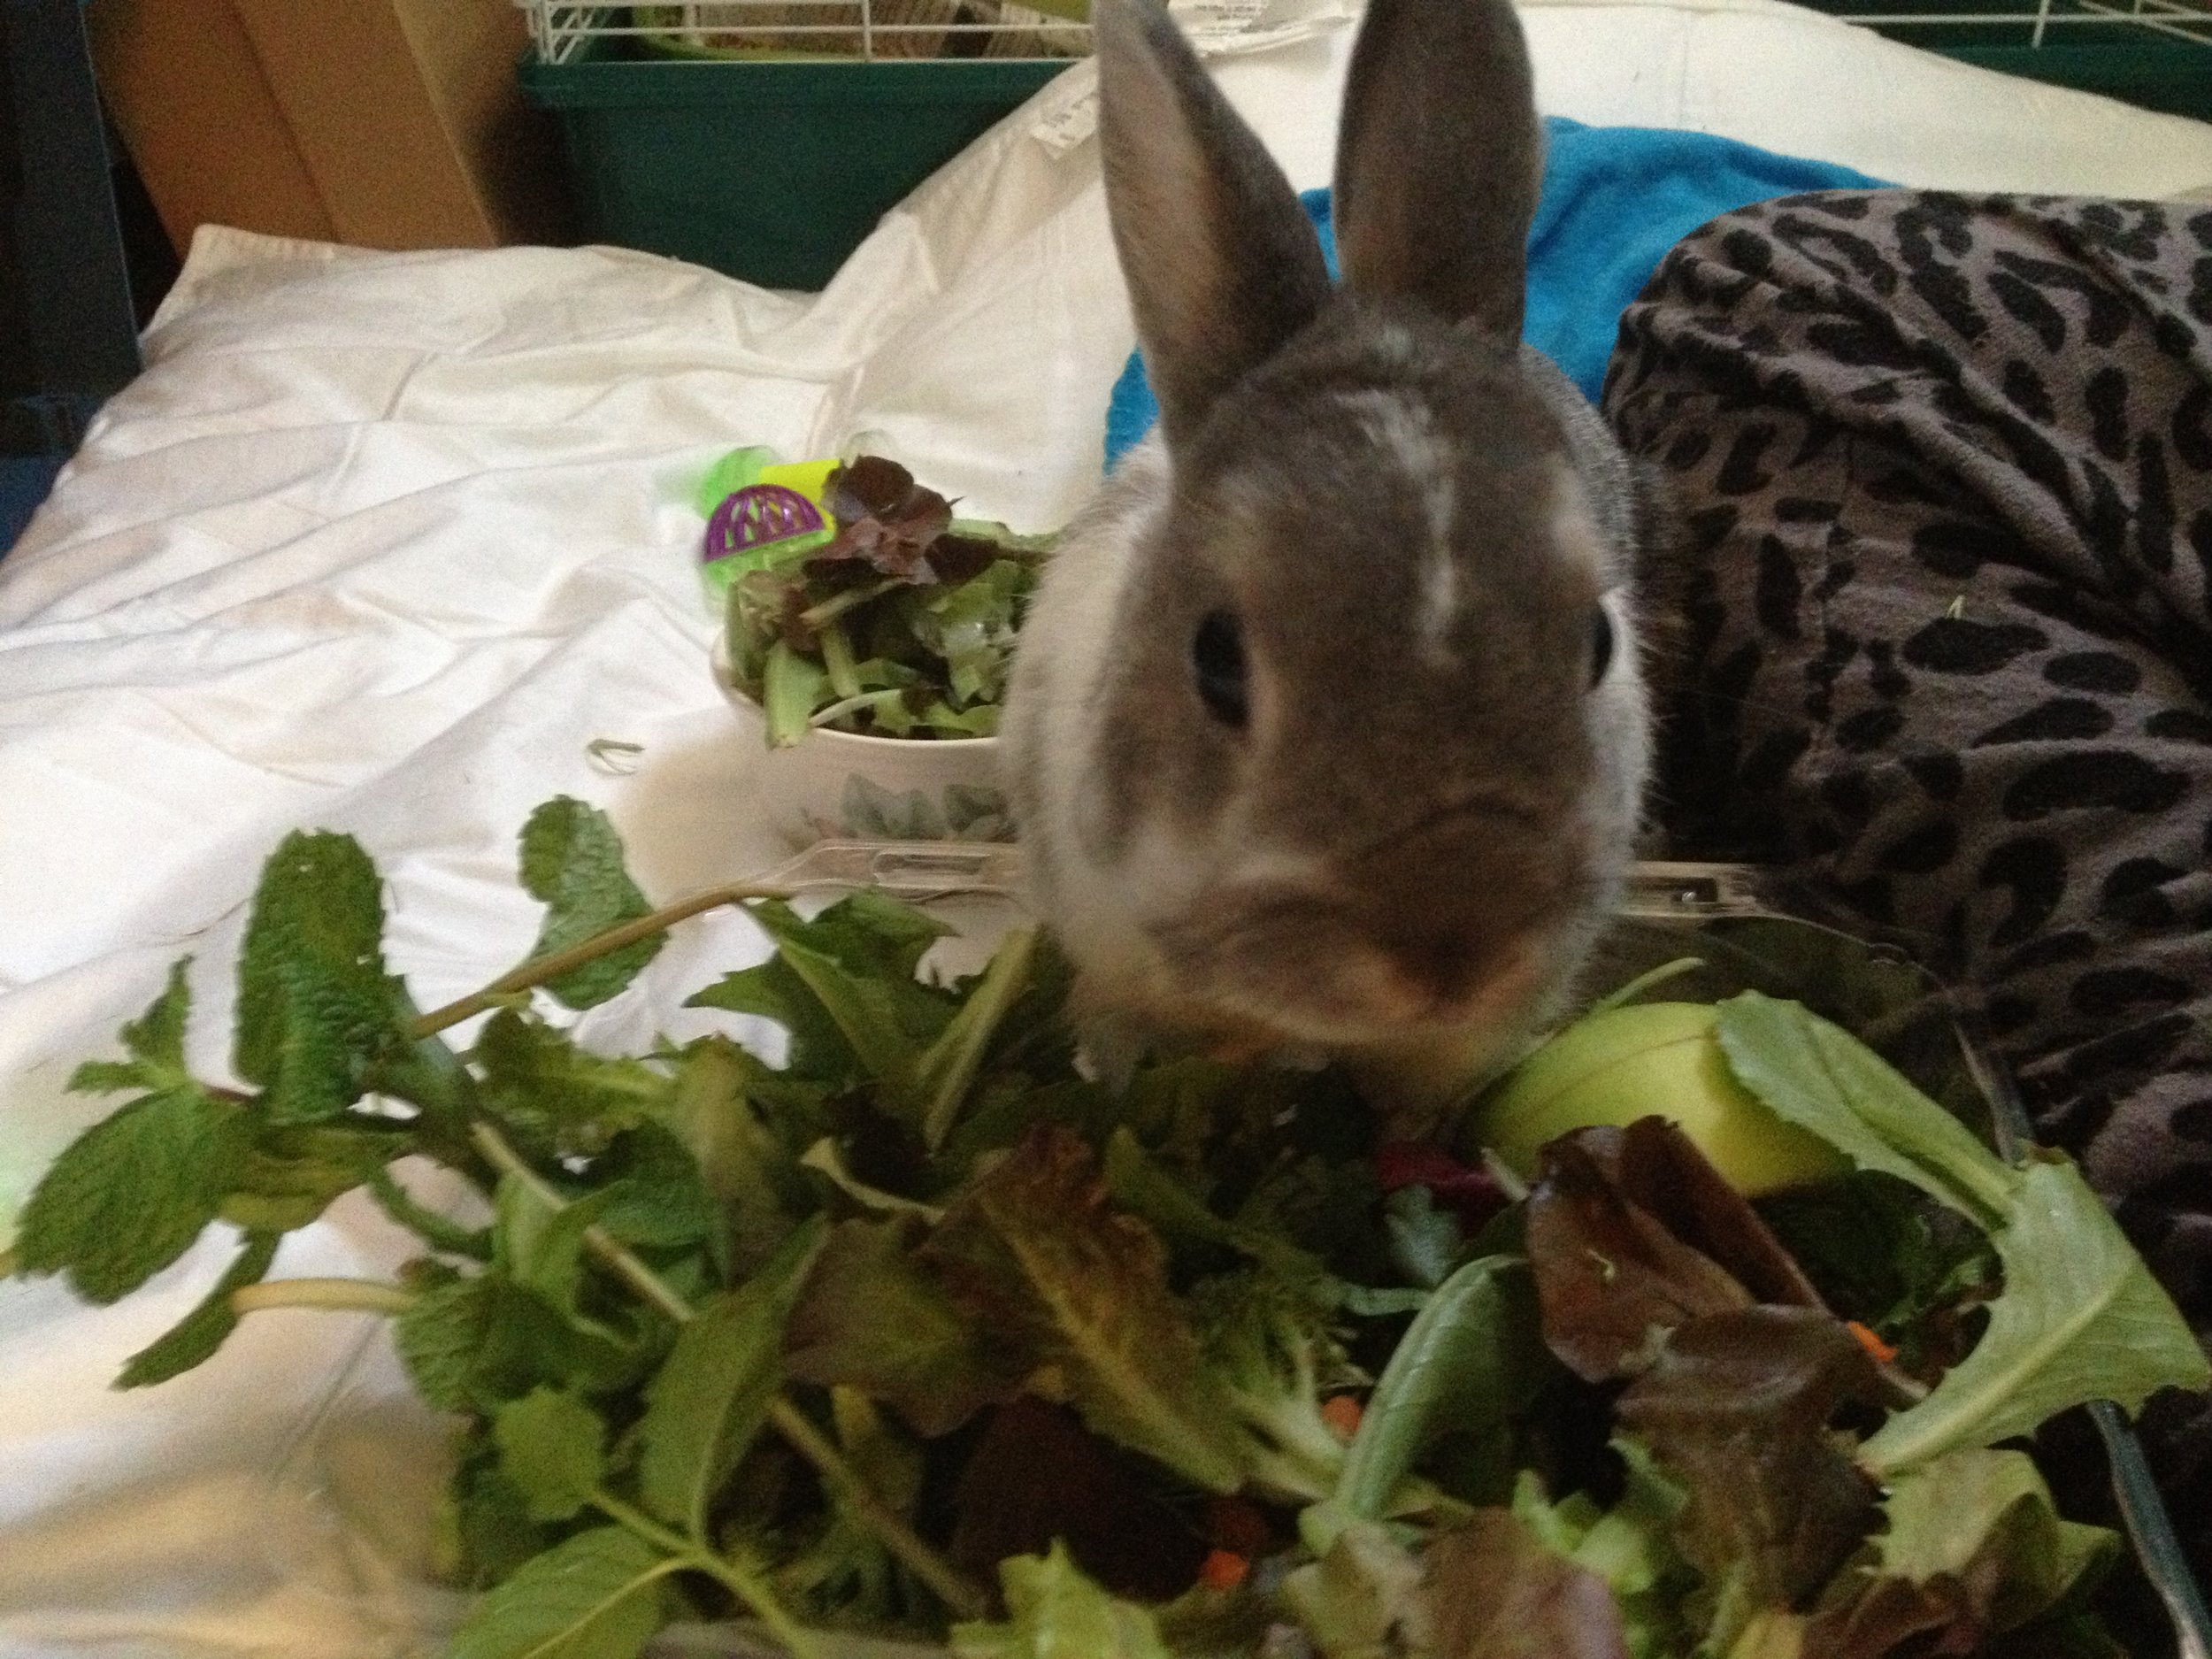 Bunny Bypasses the Bowl of Veggies Prepared for Him and Goes Straight to the Source